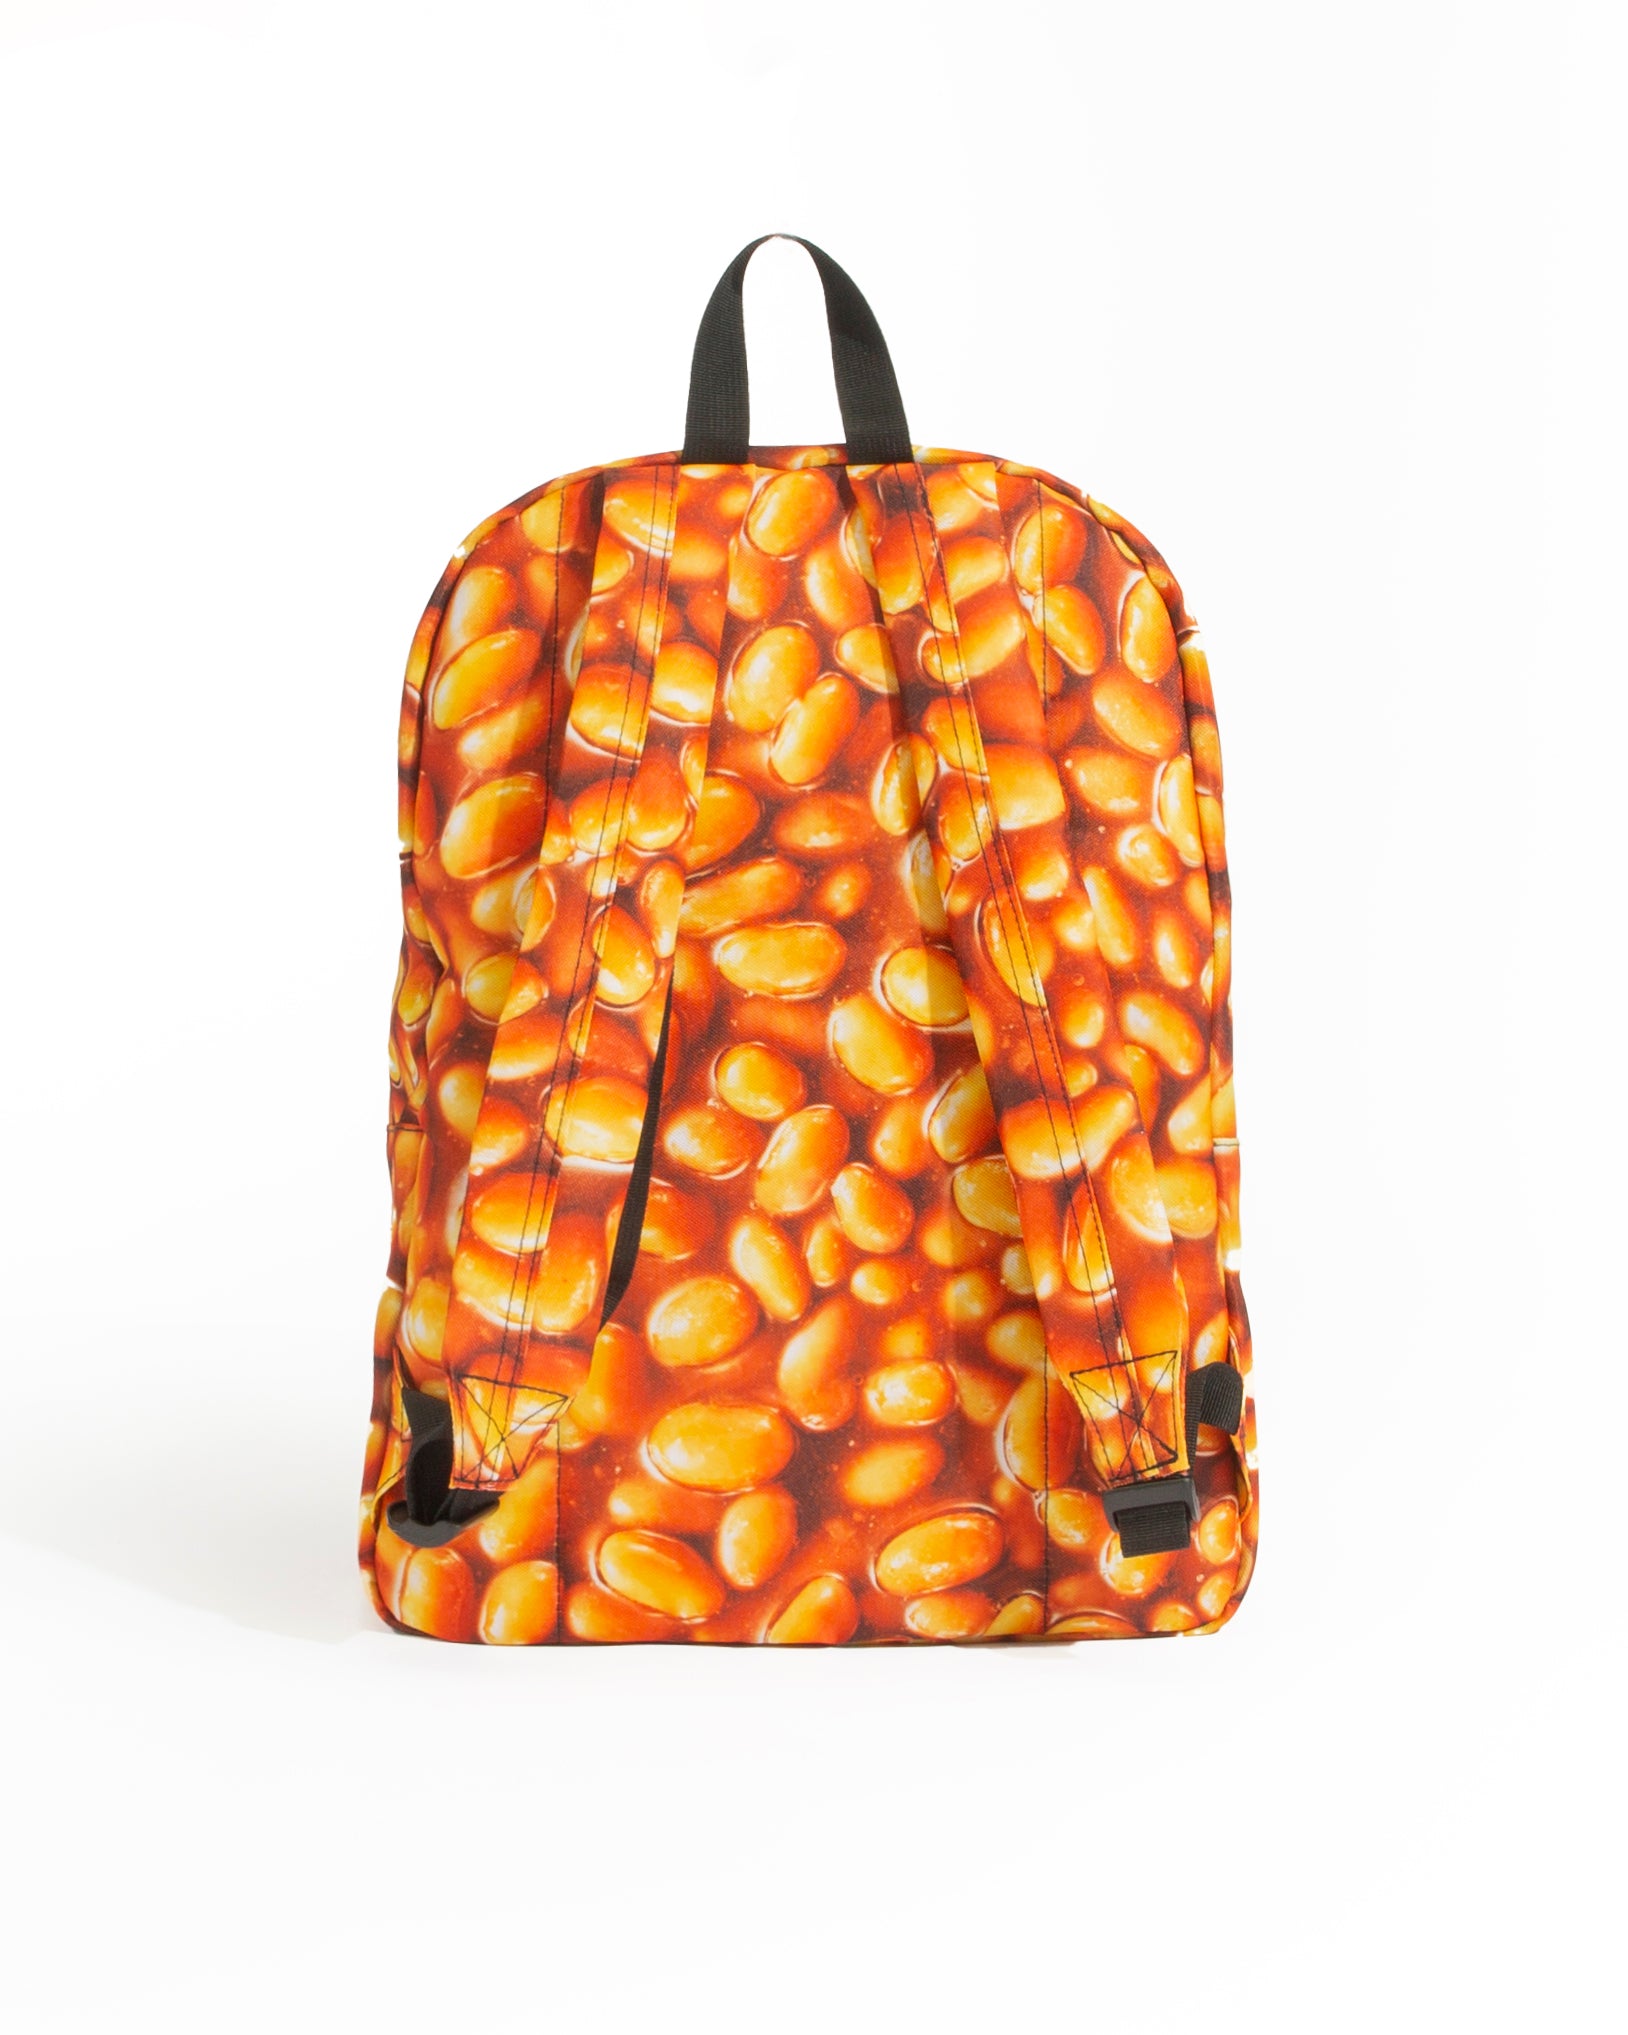 "Beans All Over" Backpack